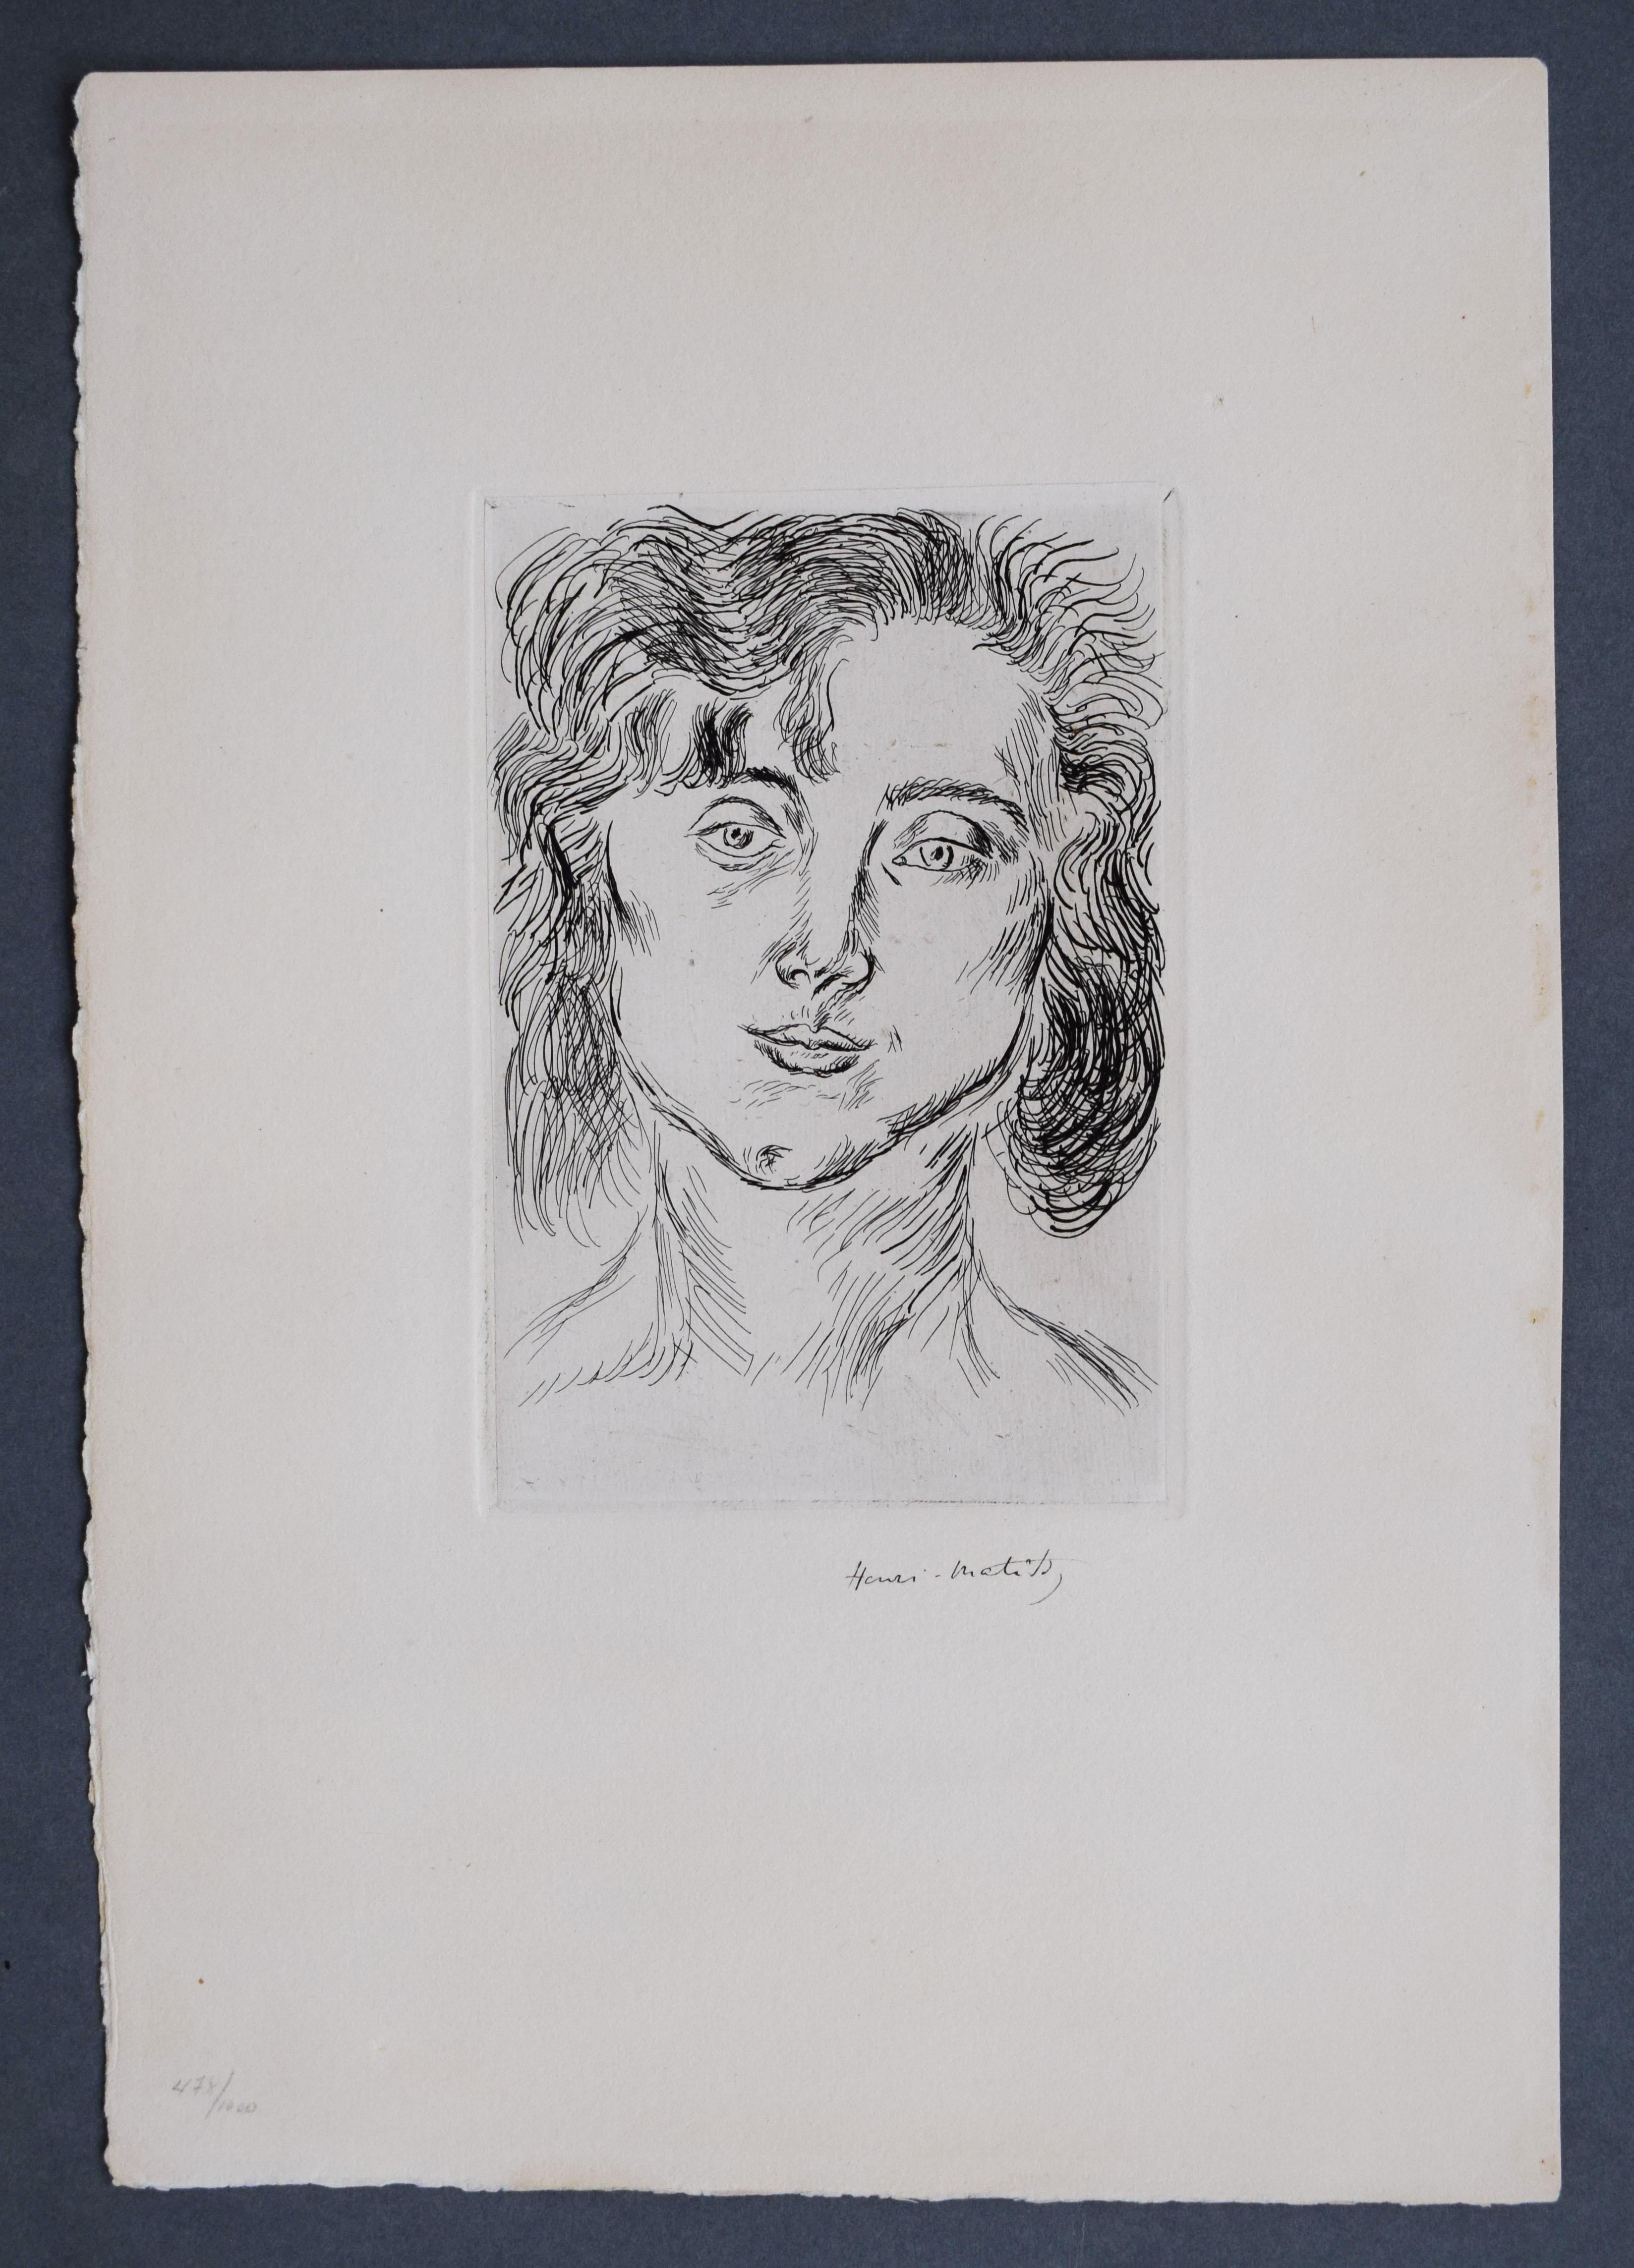 Frontispiece, from: Fifty Drawings - French Impressionism Portrait - Print by Henri Matisse